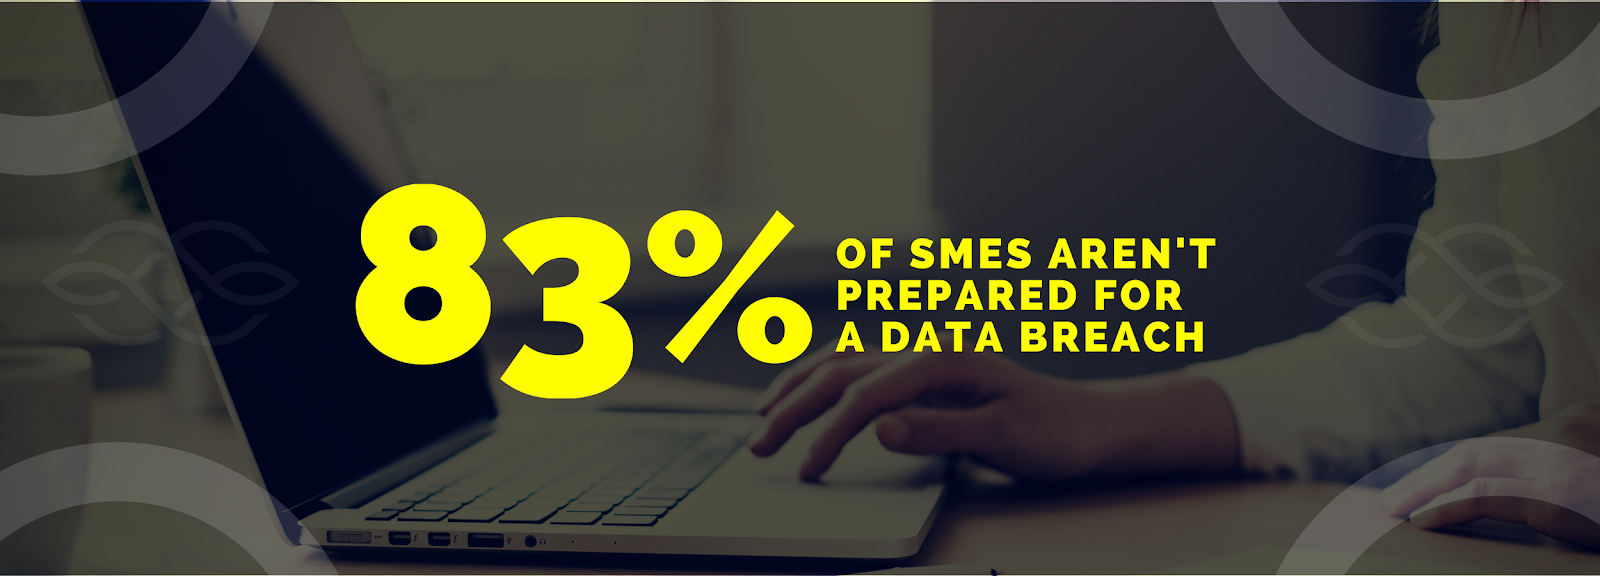 83% of SMEs aren’t prepared for a data breach: How Iagon can Help